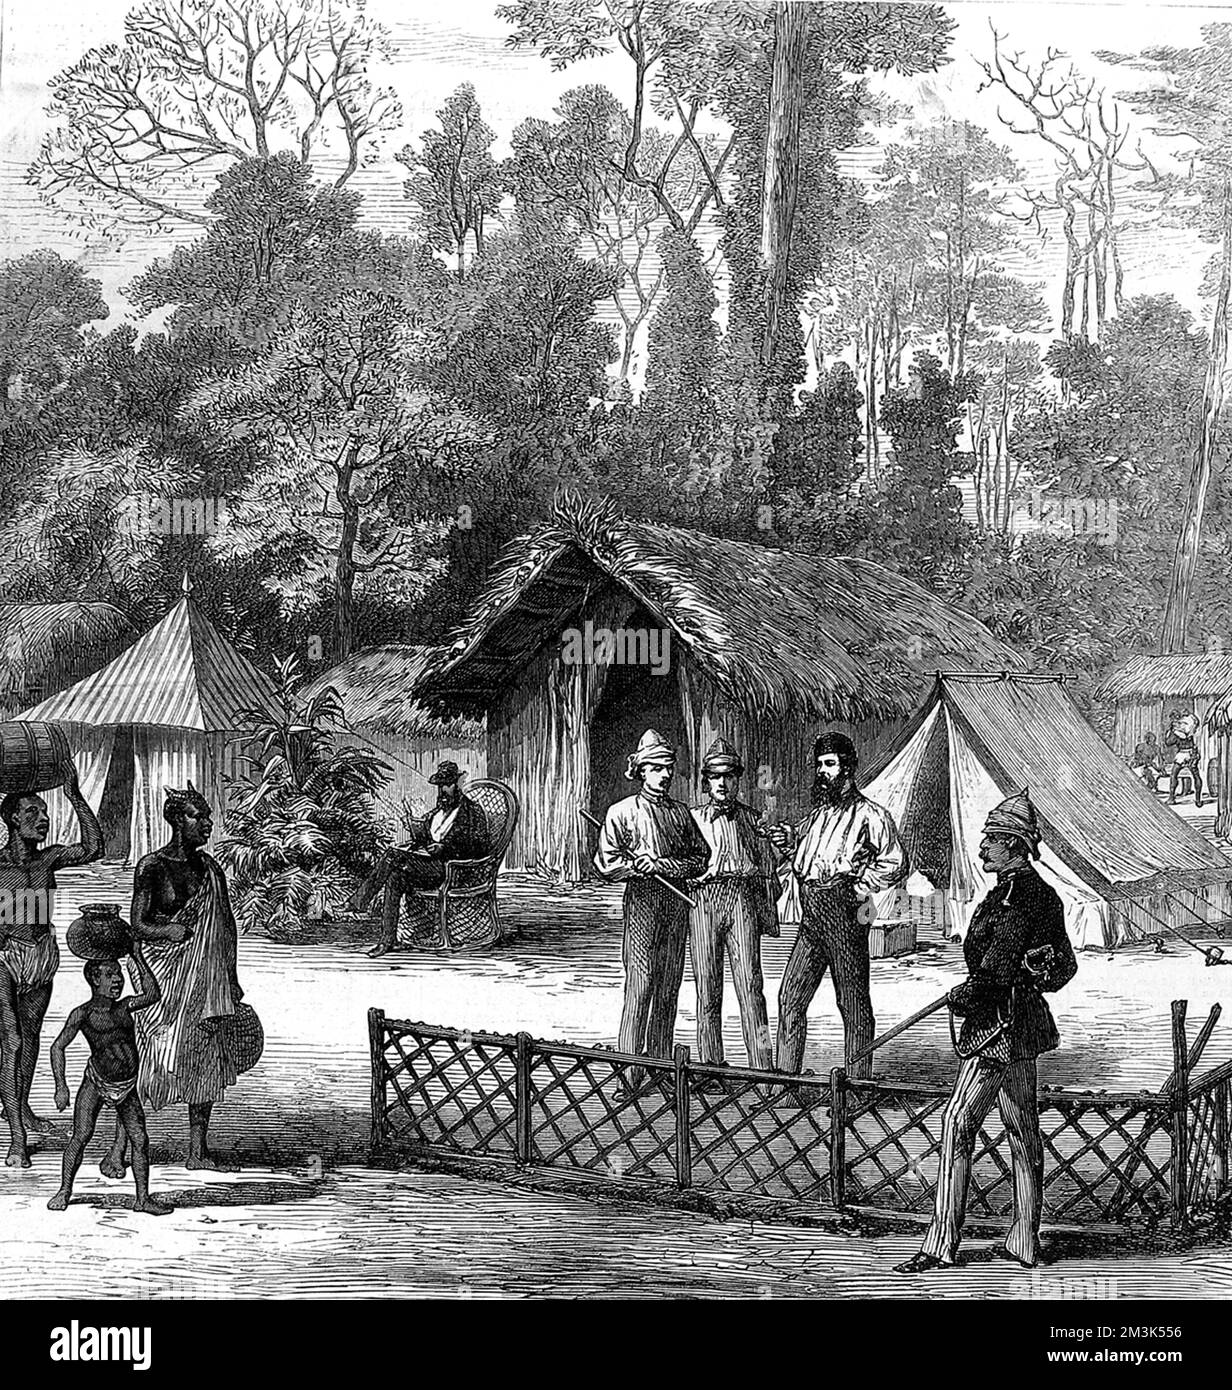 Newspaper correspondents' quarters in the camp at Prahsu. The man seated is the Times correspondent. Of the three men standing together represent, from left to right, the New York Herald, the Illustrated London News (middle) and the Standard newspapers here to report on war. The second Ashanti War fought between,1873-74, was between King Kofi Karikari, ruler of the Ashanti (or Asantehene), and the British. Both were trying to secure the coastal town of Elmina on the West Coast of Africa also known as the Gold Coast.     Date: 1874 Stock Photo